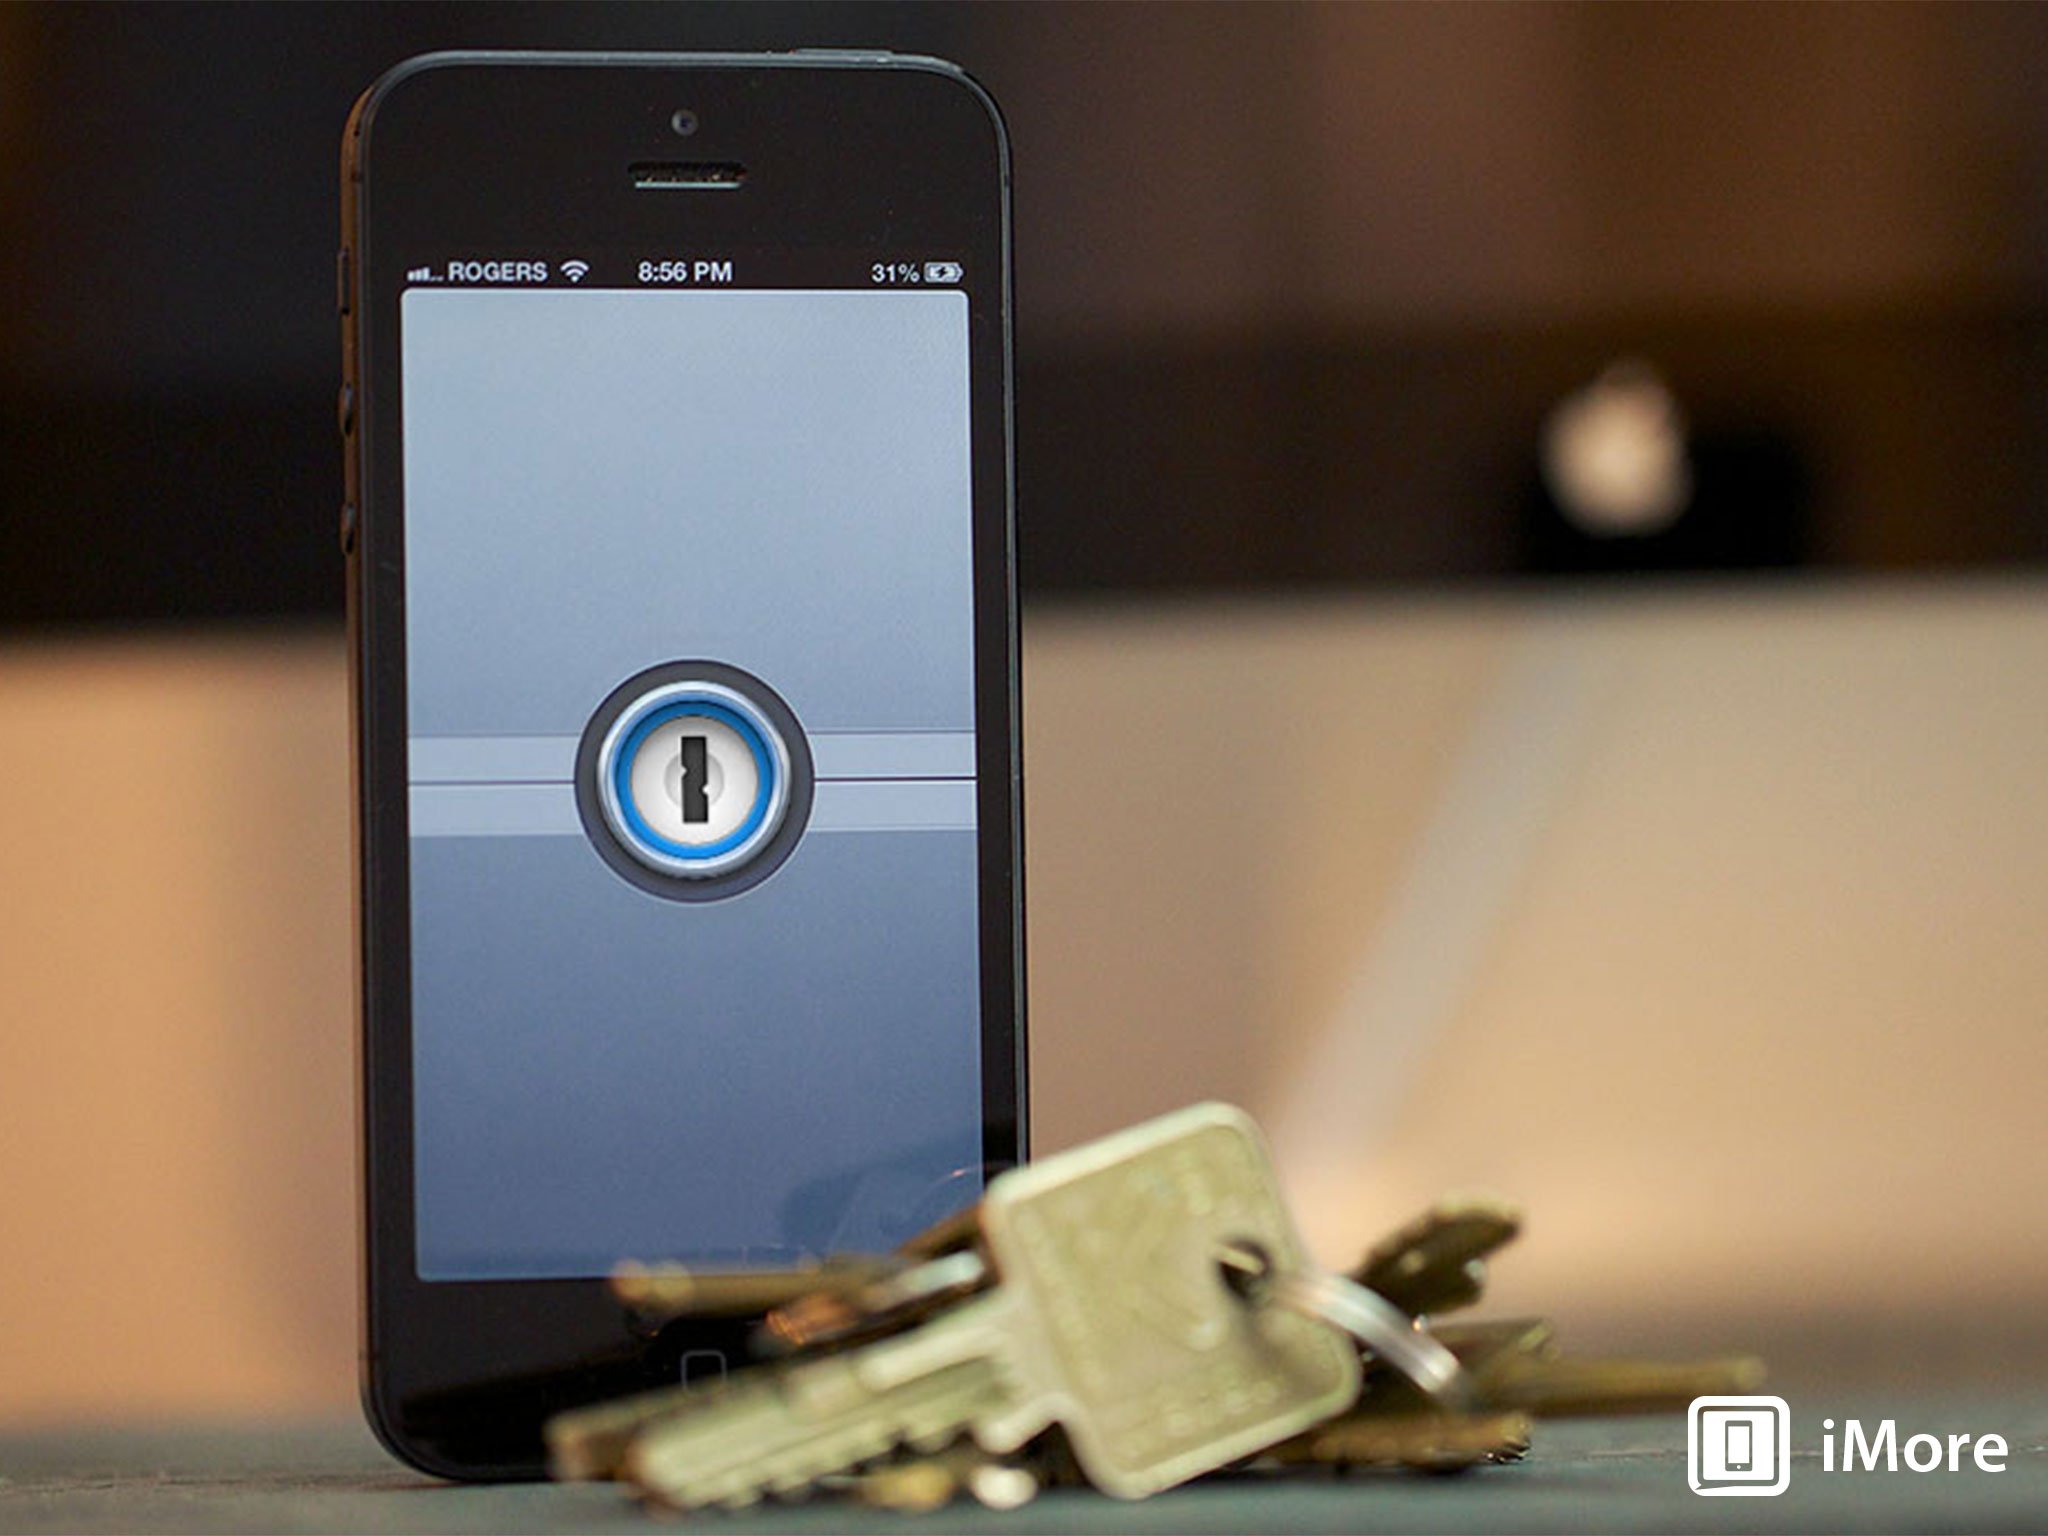 1Password 4 for iPhone